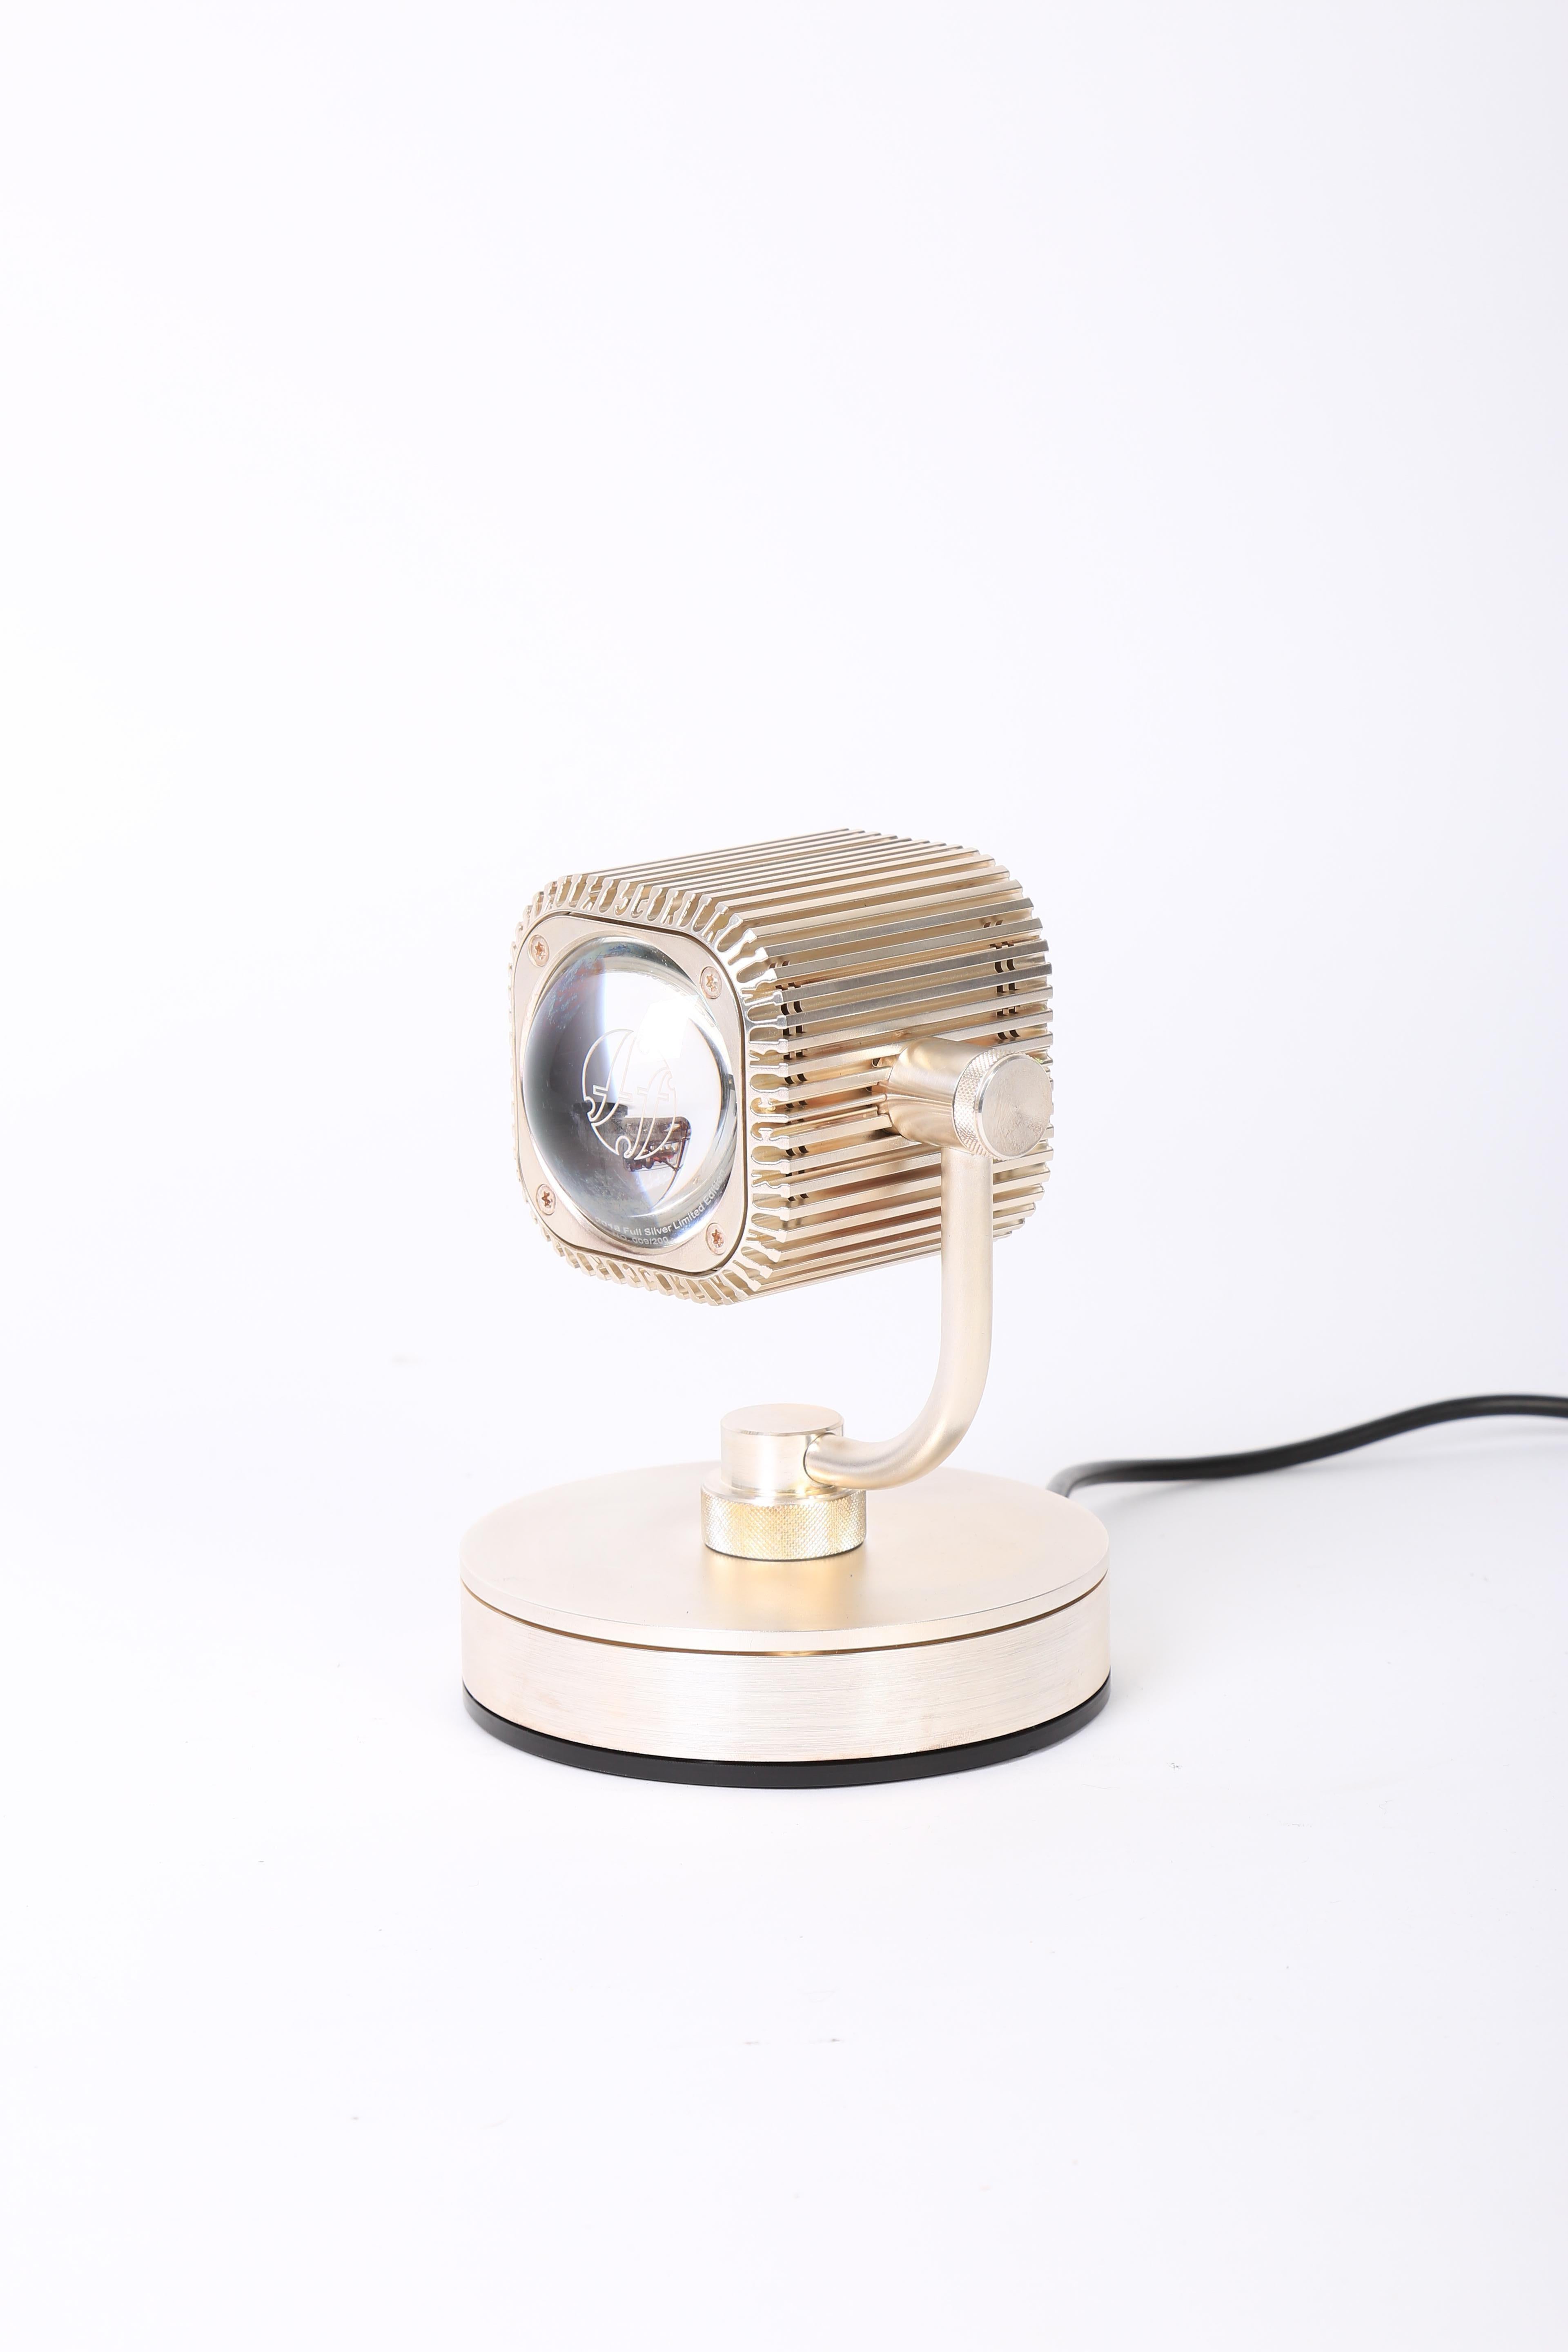 Silver spot corduroy Studio series by Fosfens
2019
Materials: Optical glass lens, aluminium, brass
Dimensions: ø 15.7cm x 27cm


Made to order creations can be done
Fosfens Limited Edition

Lampadaire description: 19.5W - 1770lm - 2700°K